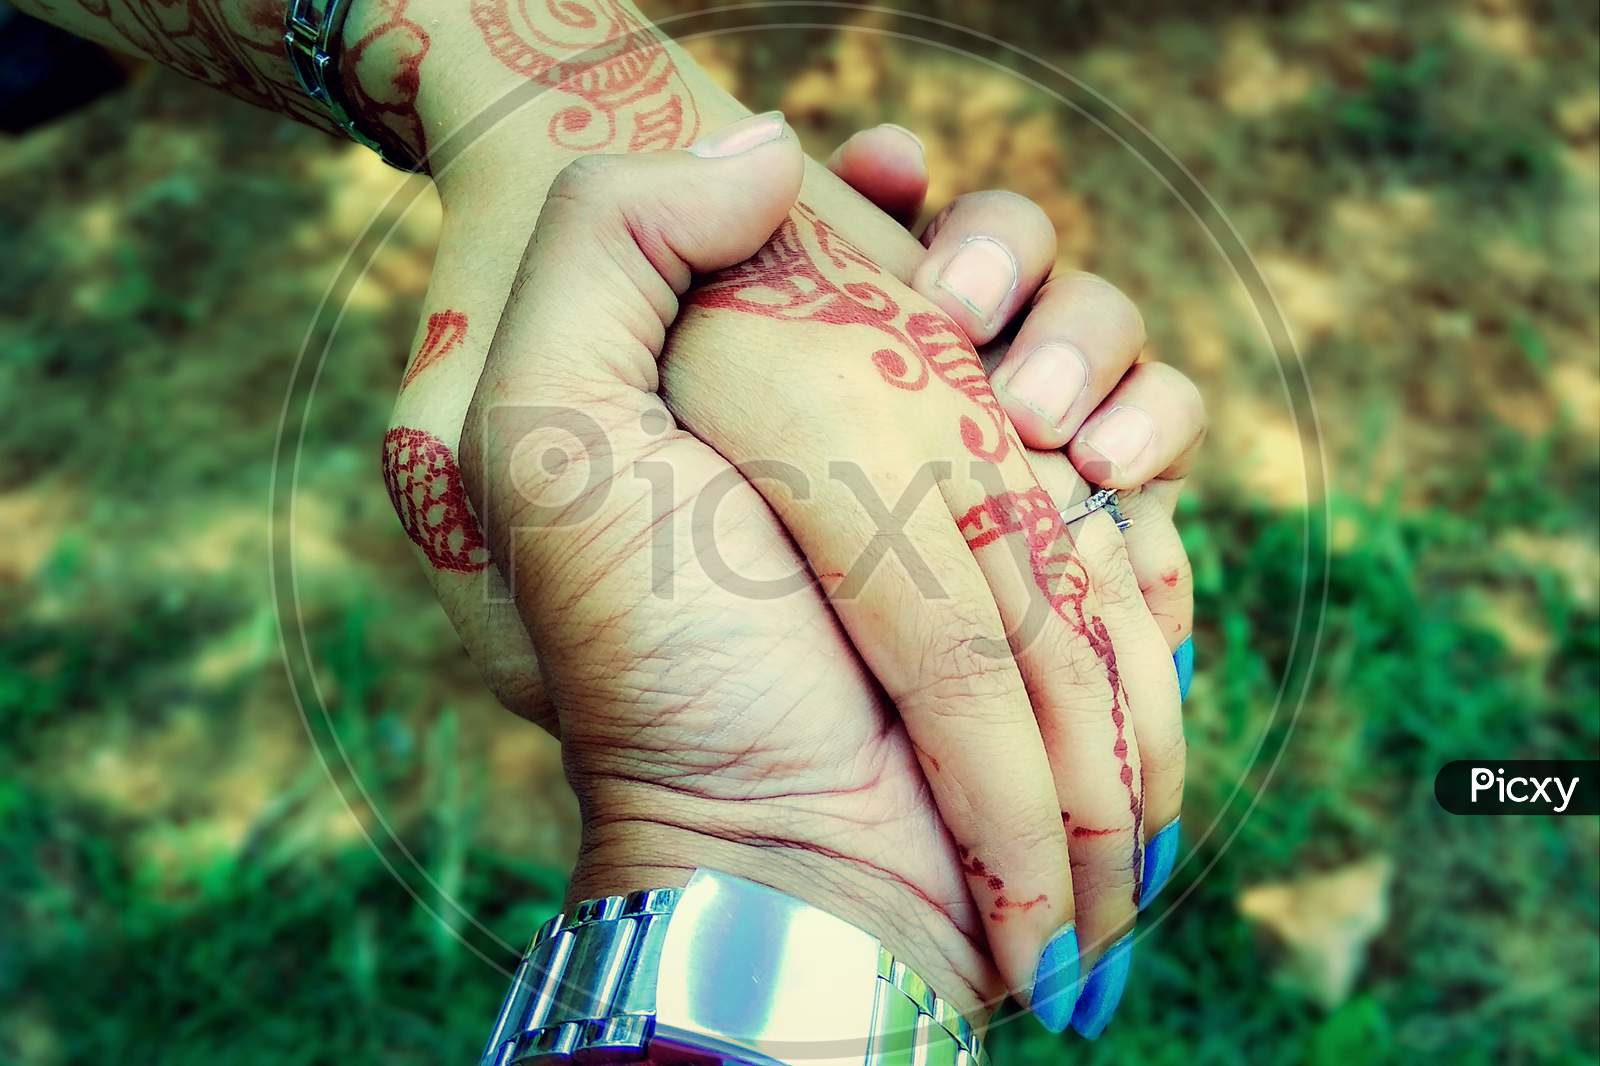 Shot Of Romantic Couple Holding Hands In A Field. Close Up Shot Of Man And Woman With Hand In Hand Walking Through Grass Field